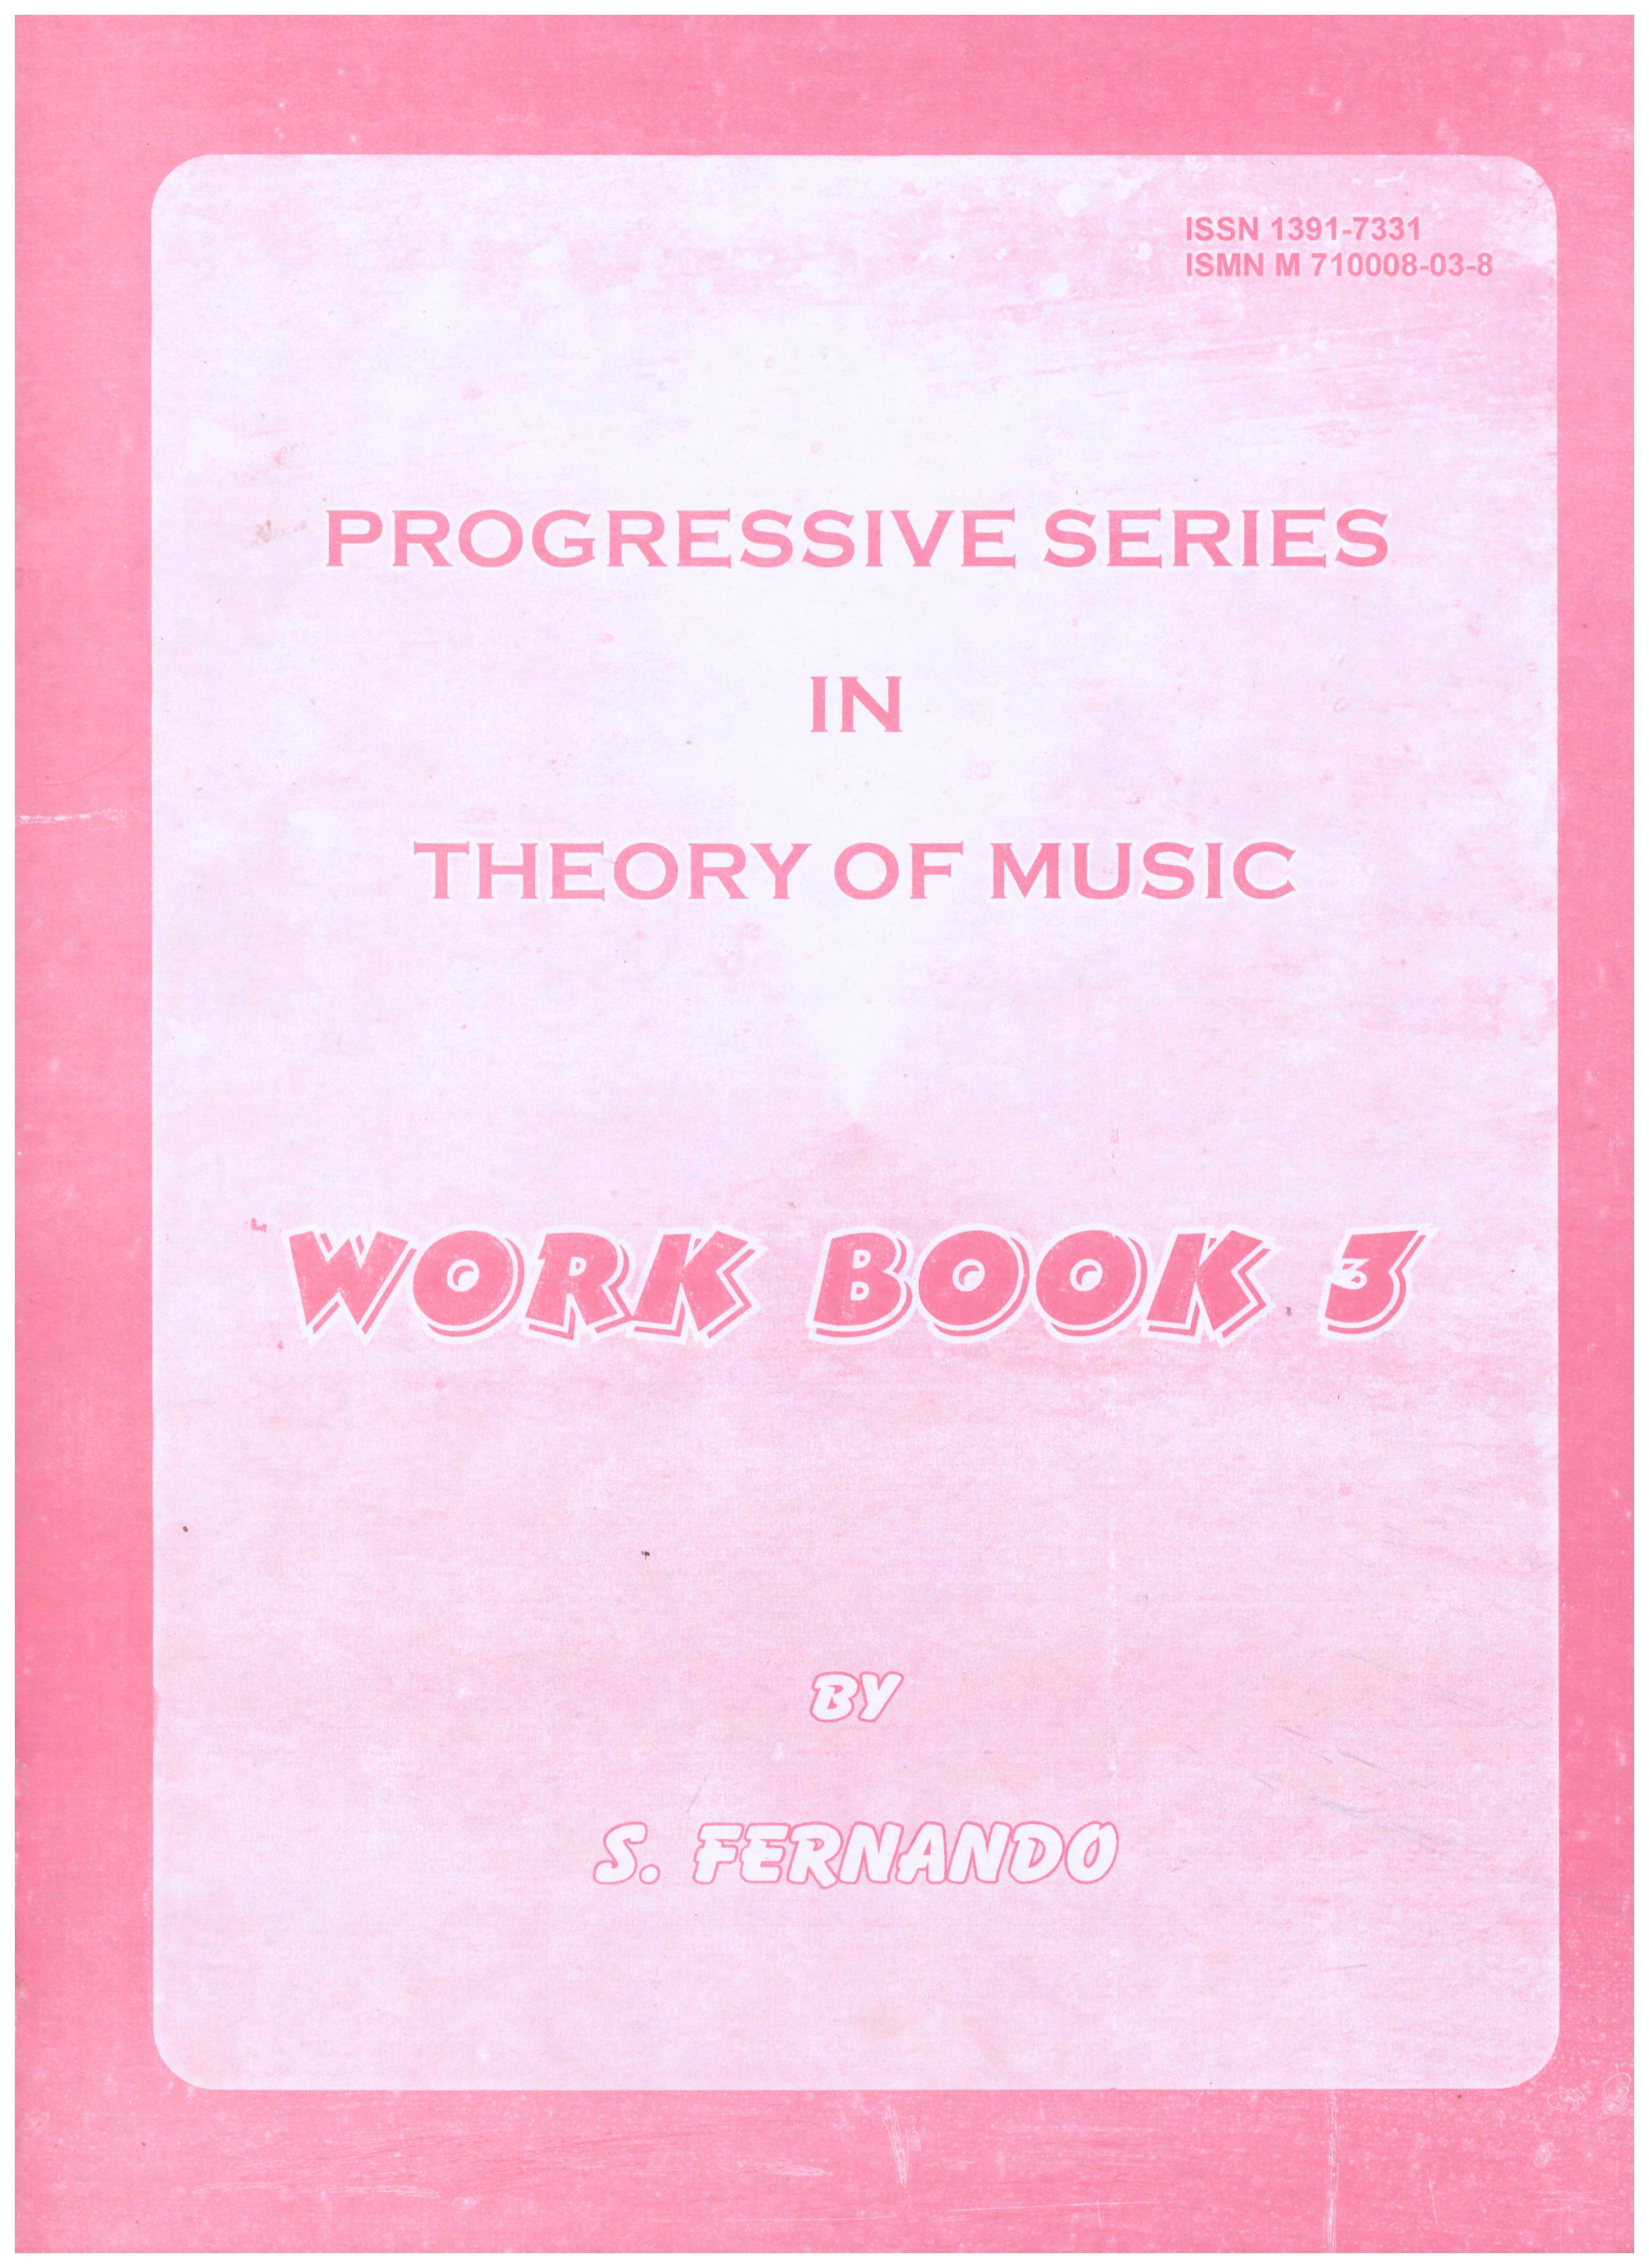 Progressive Series in Theory of Music Work Book 3